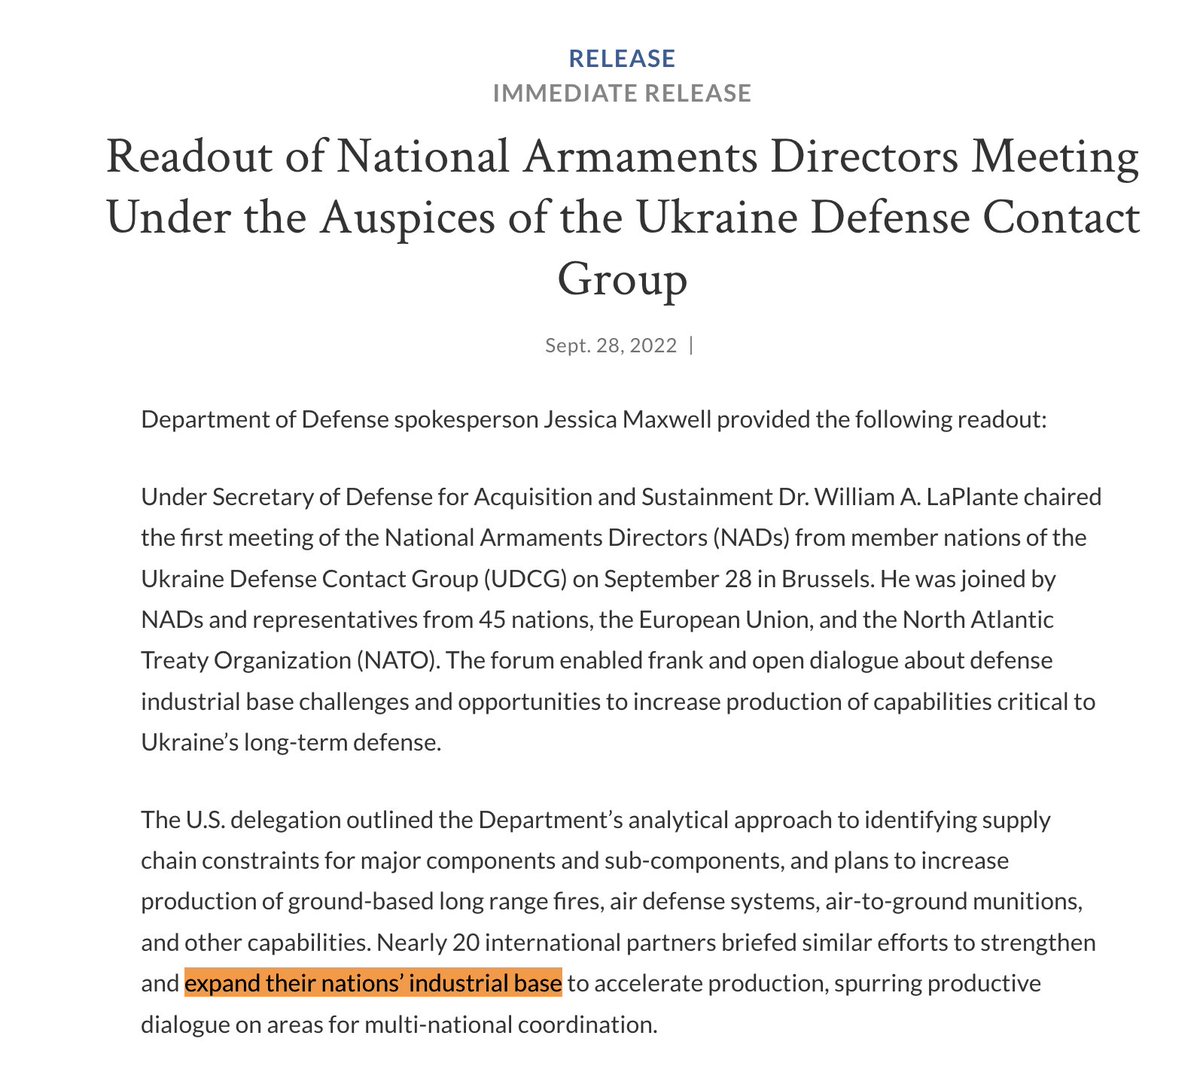 In September, the Defense Department announced that the United States and its allies were planning to “expand their nations’ industrial base” for building bombs, rockets and artillery for the war with Russia in Ukraine.